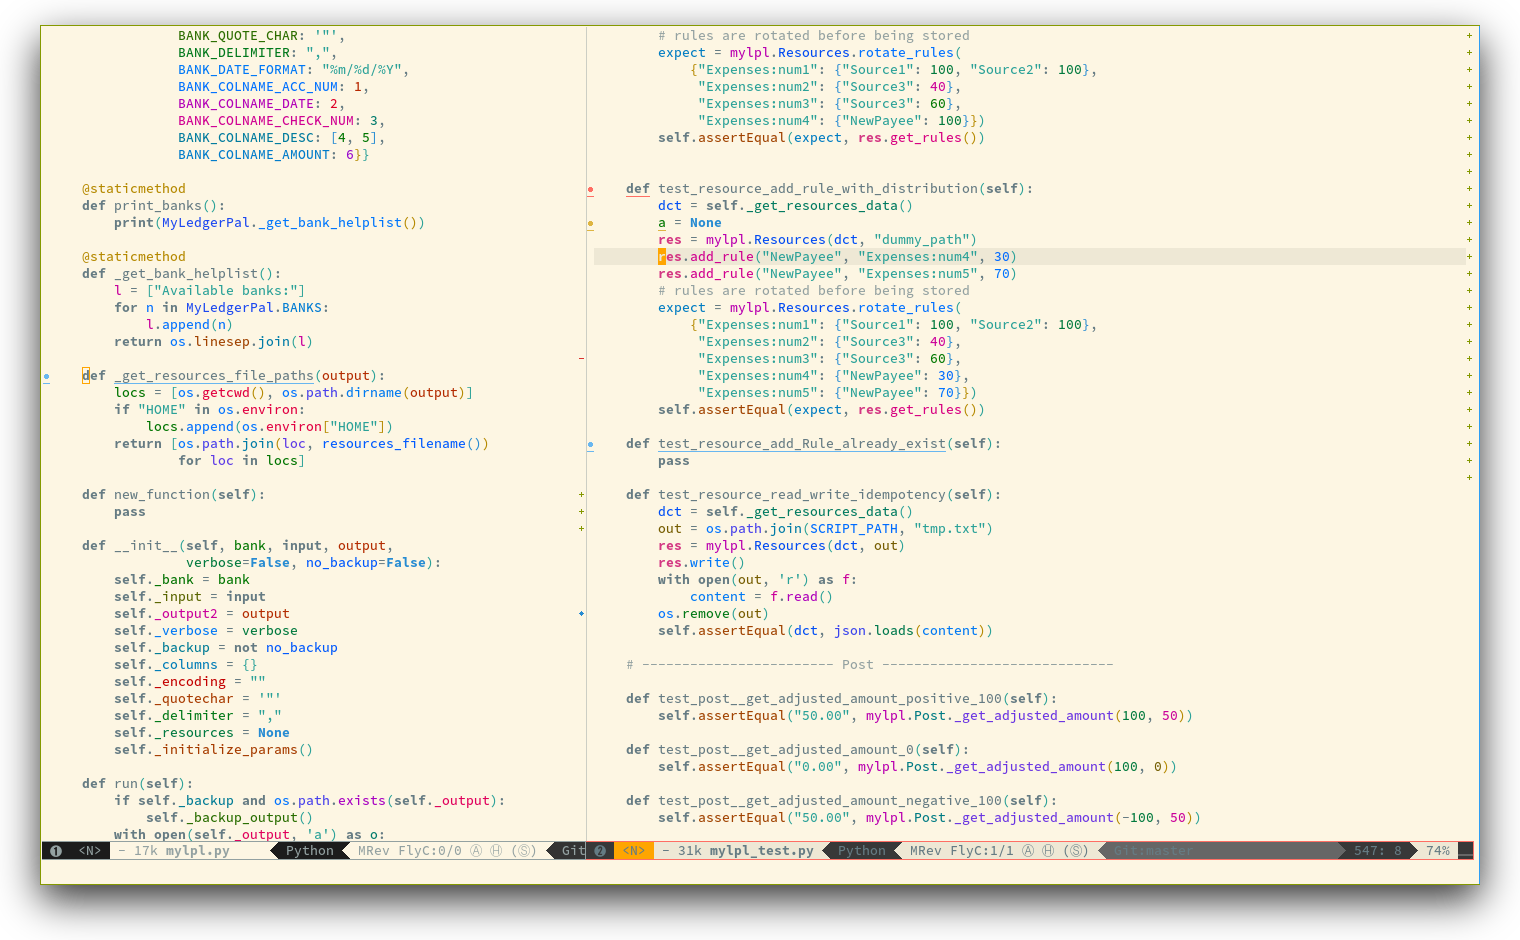 /TakeV/spacemacs/media/commit/abc9912860e8e56ee04c9c2a6cc9607eb18d35fb/layers/+themes/colors/img/theme-tweaks-python.png